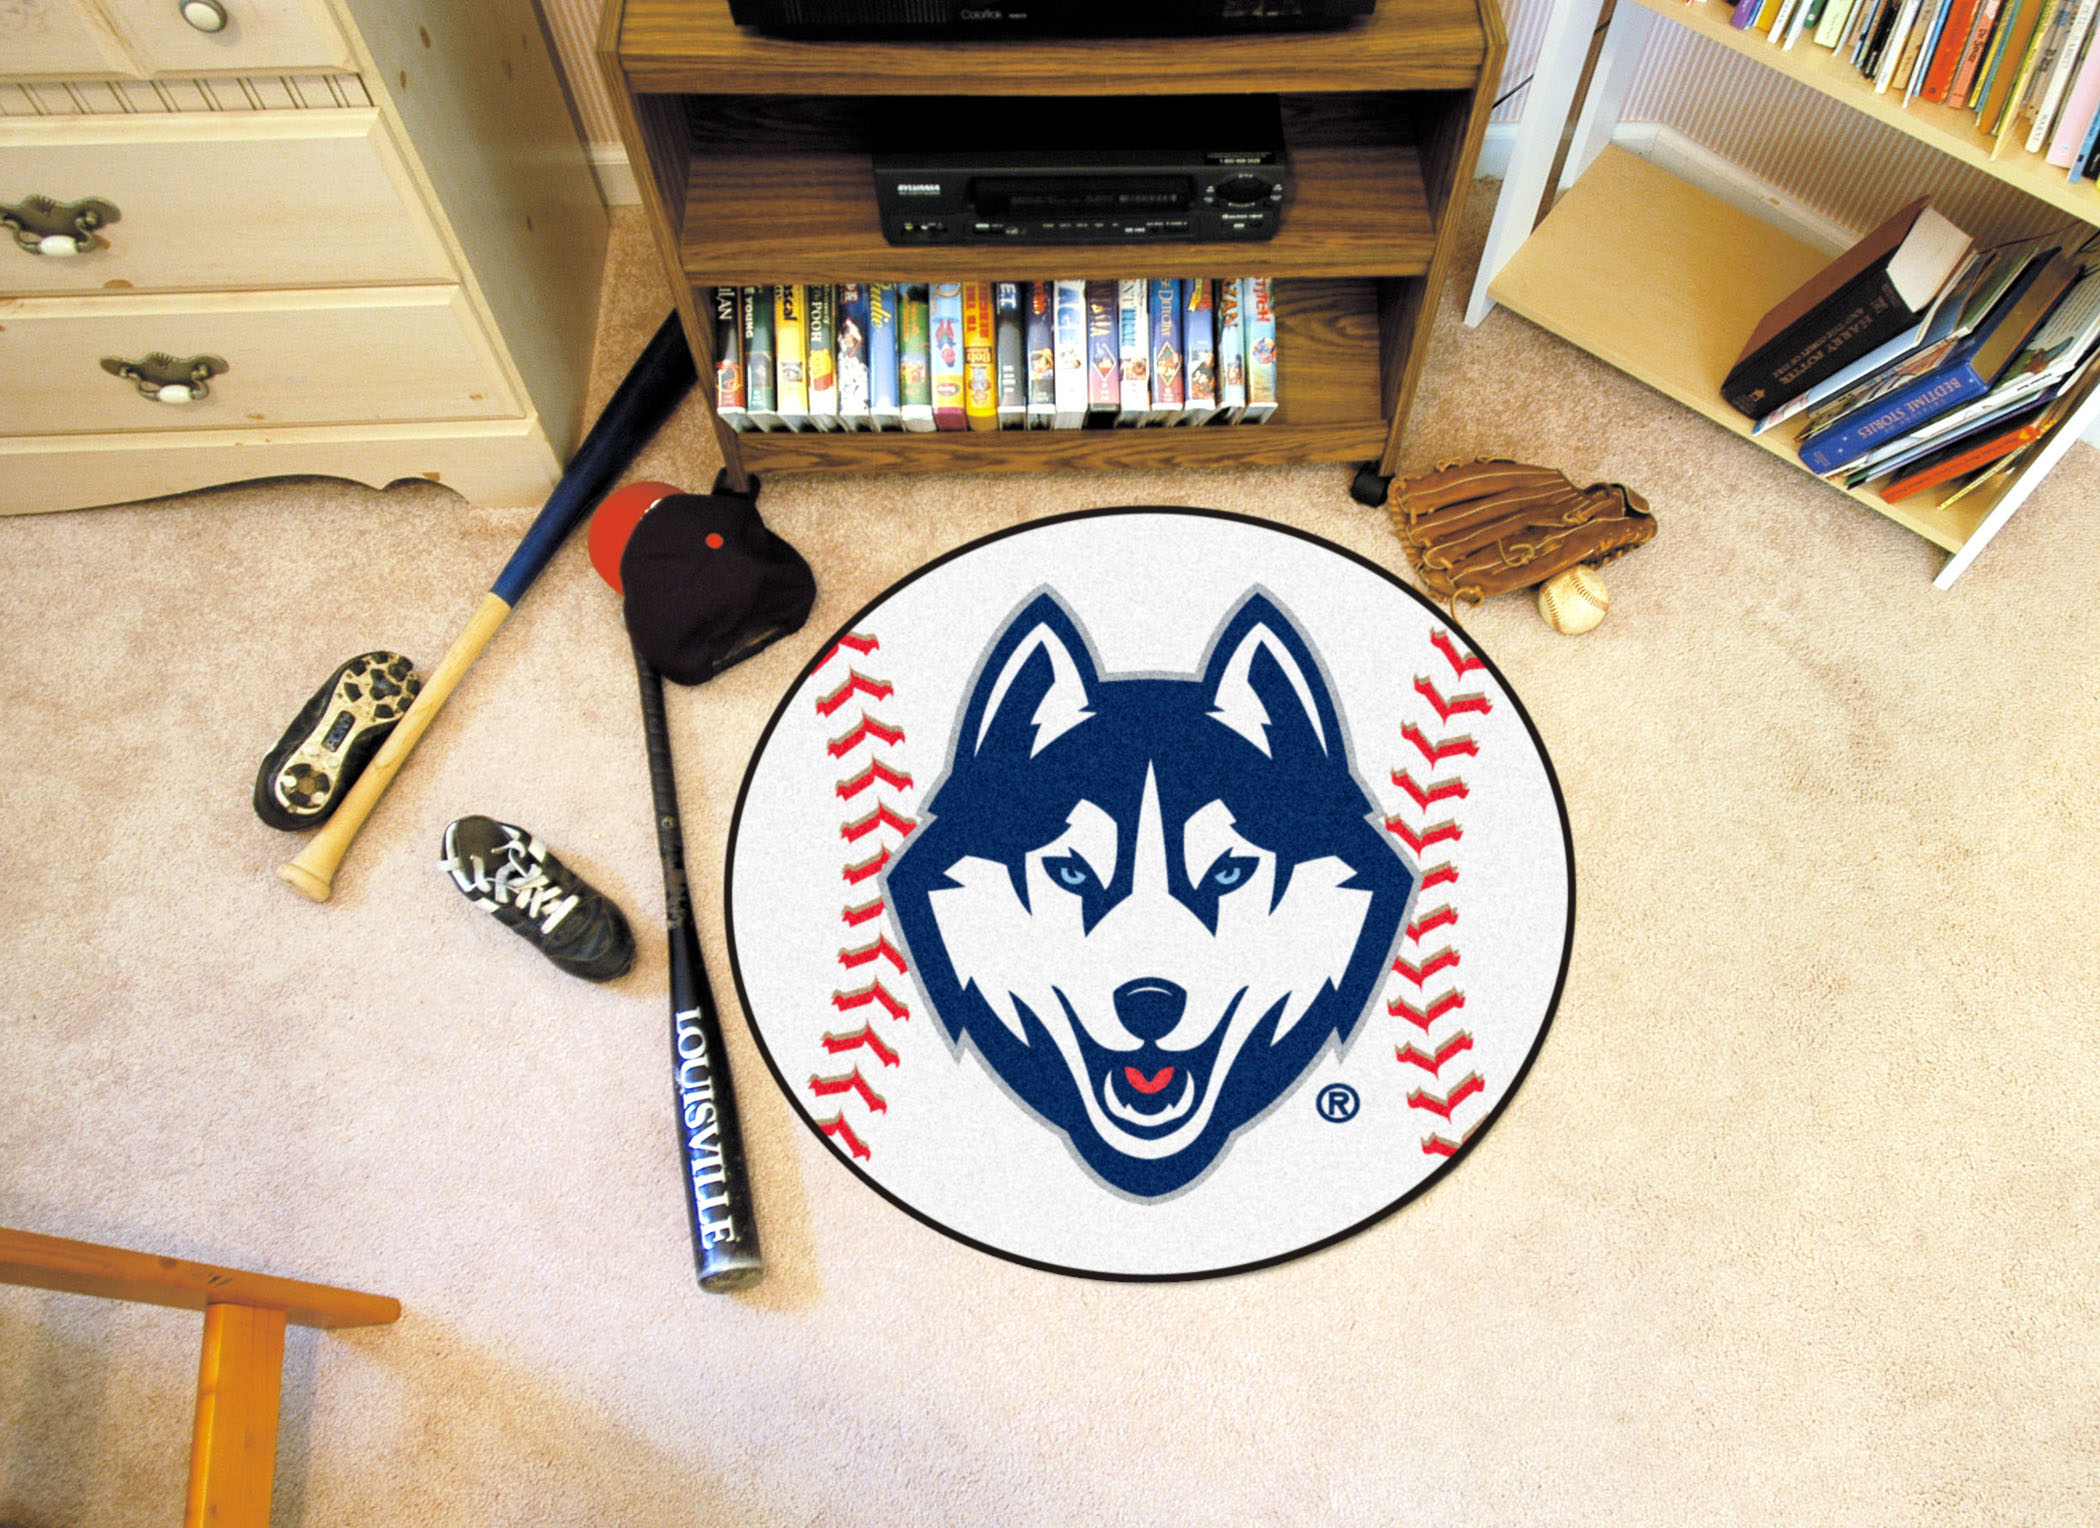 University of Connecticut Ball Shaped Area Rugs (Ball Shaped Area Rugs: Baseball)